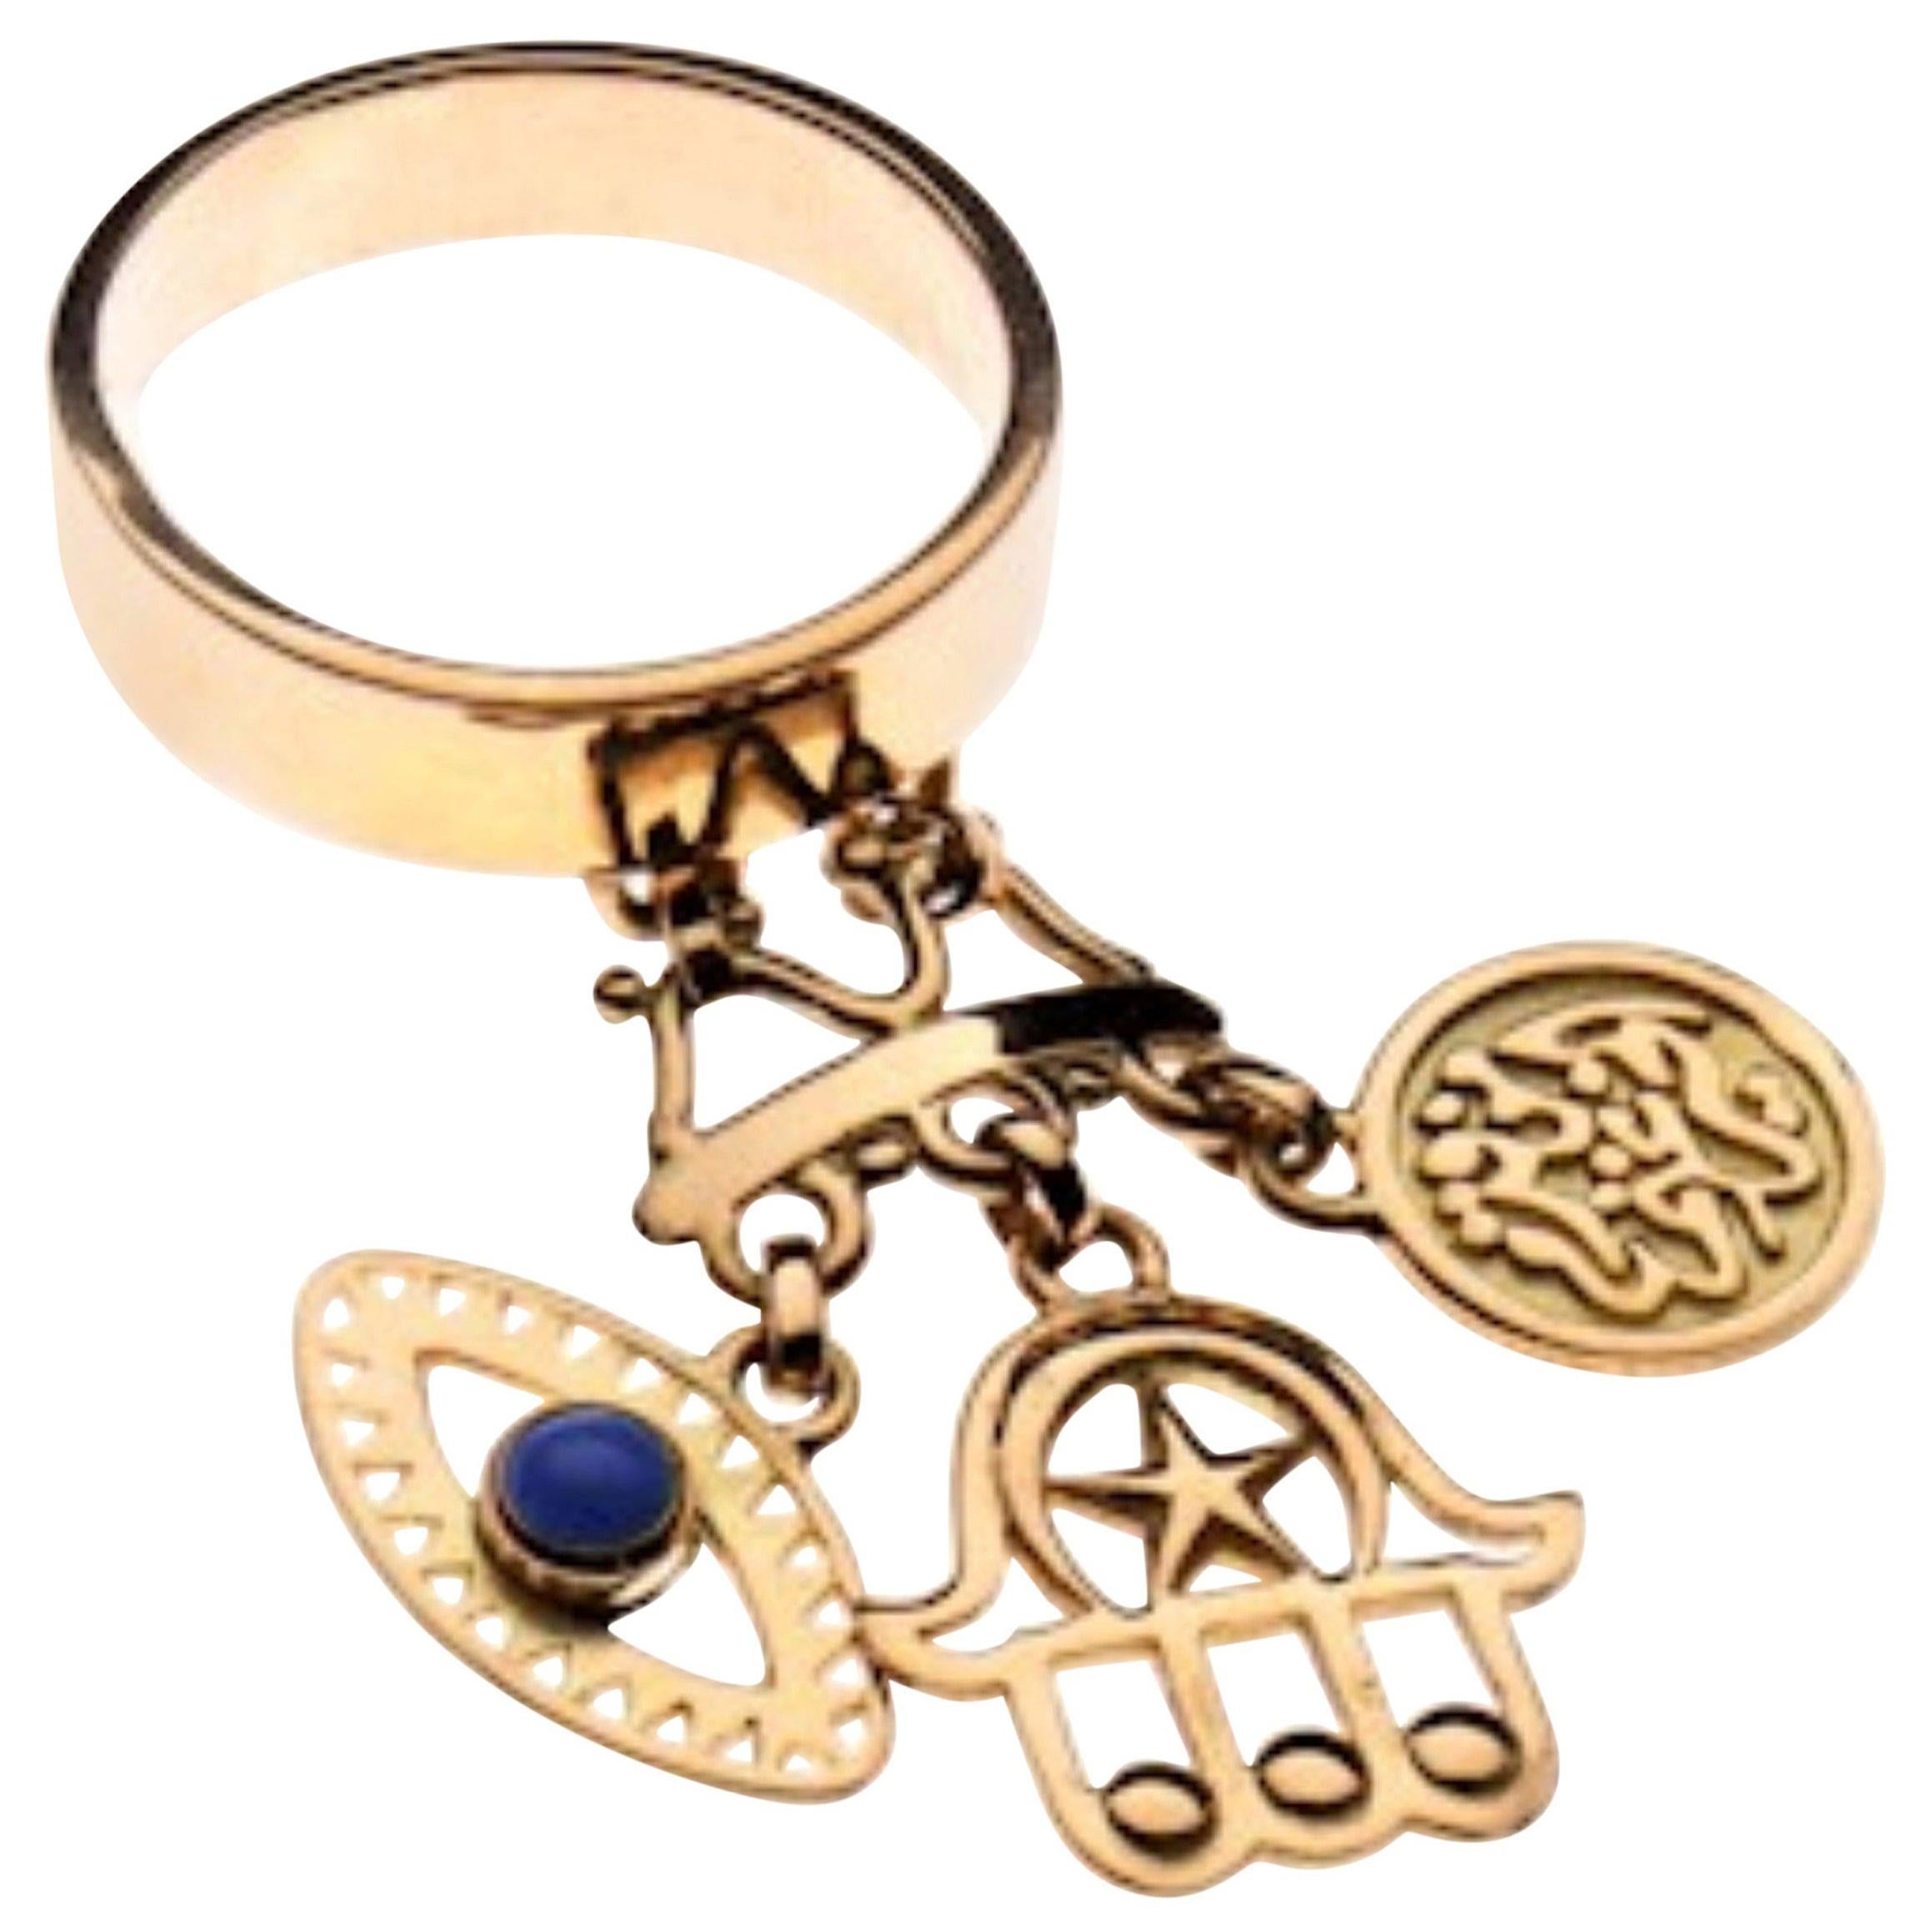 For Sale:  18 Karat Gold and Cabochon Lapis Rumuz Dainty Charm Ring